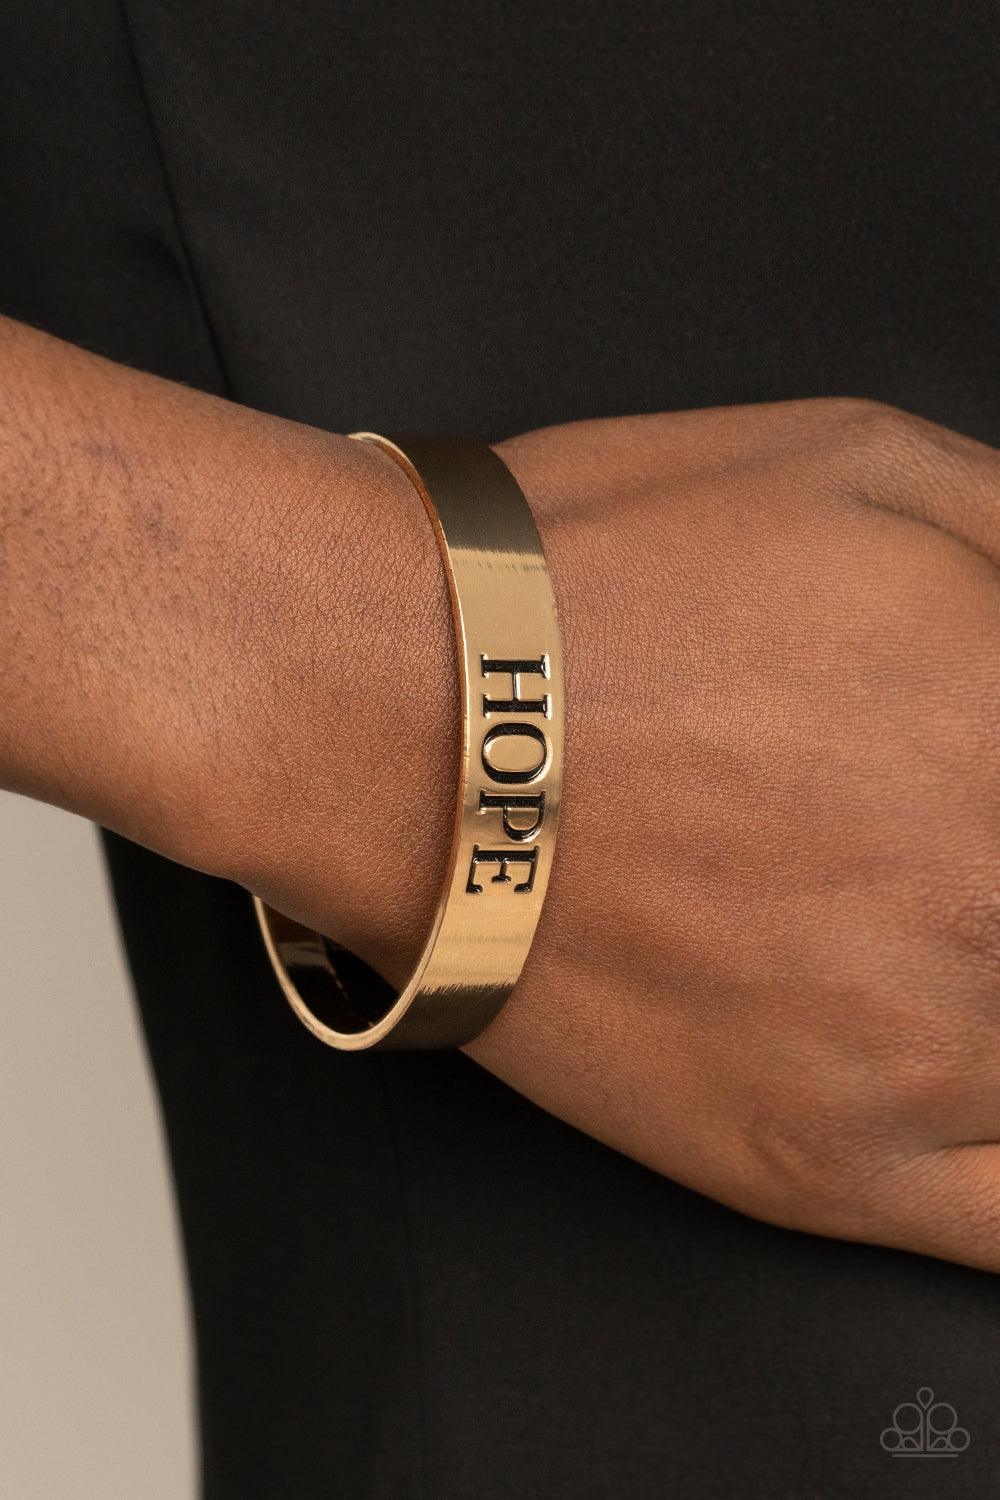 Paparazzi Accessories Hope Makes The World Go Round - Gold The center of a shiny gold cuff is stamped in the word, "Hope," for an inspirational look. Sold as one individual bracelet. Jewelry